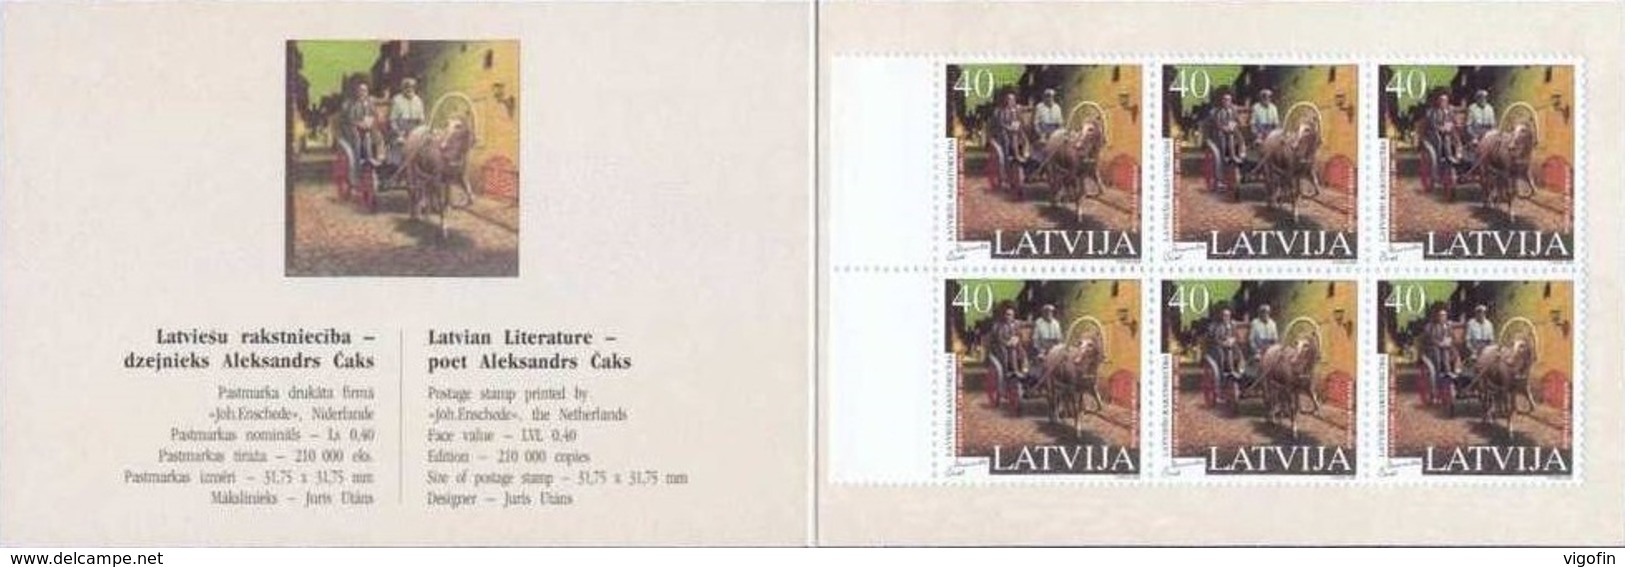 LV 2000-518 THE STAMPS SHOW LONDON, LATVIA, BOOKLET, MNH - Letland